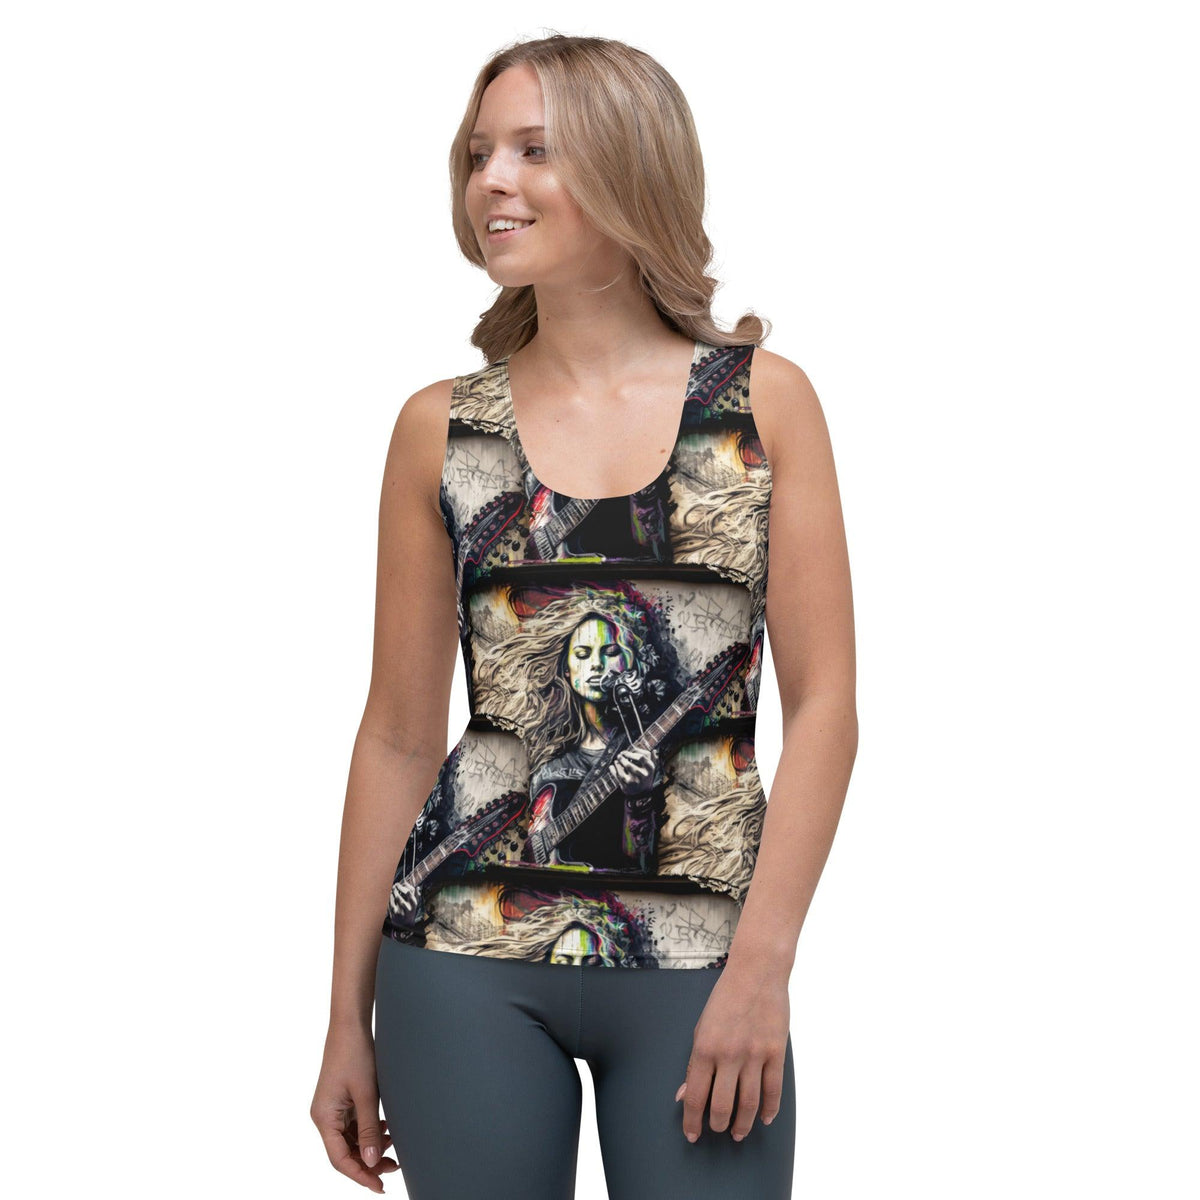 Her Music Soothes Souls Sublimation Cut & Sew Tank Top - Beyond T-shirts